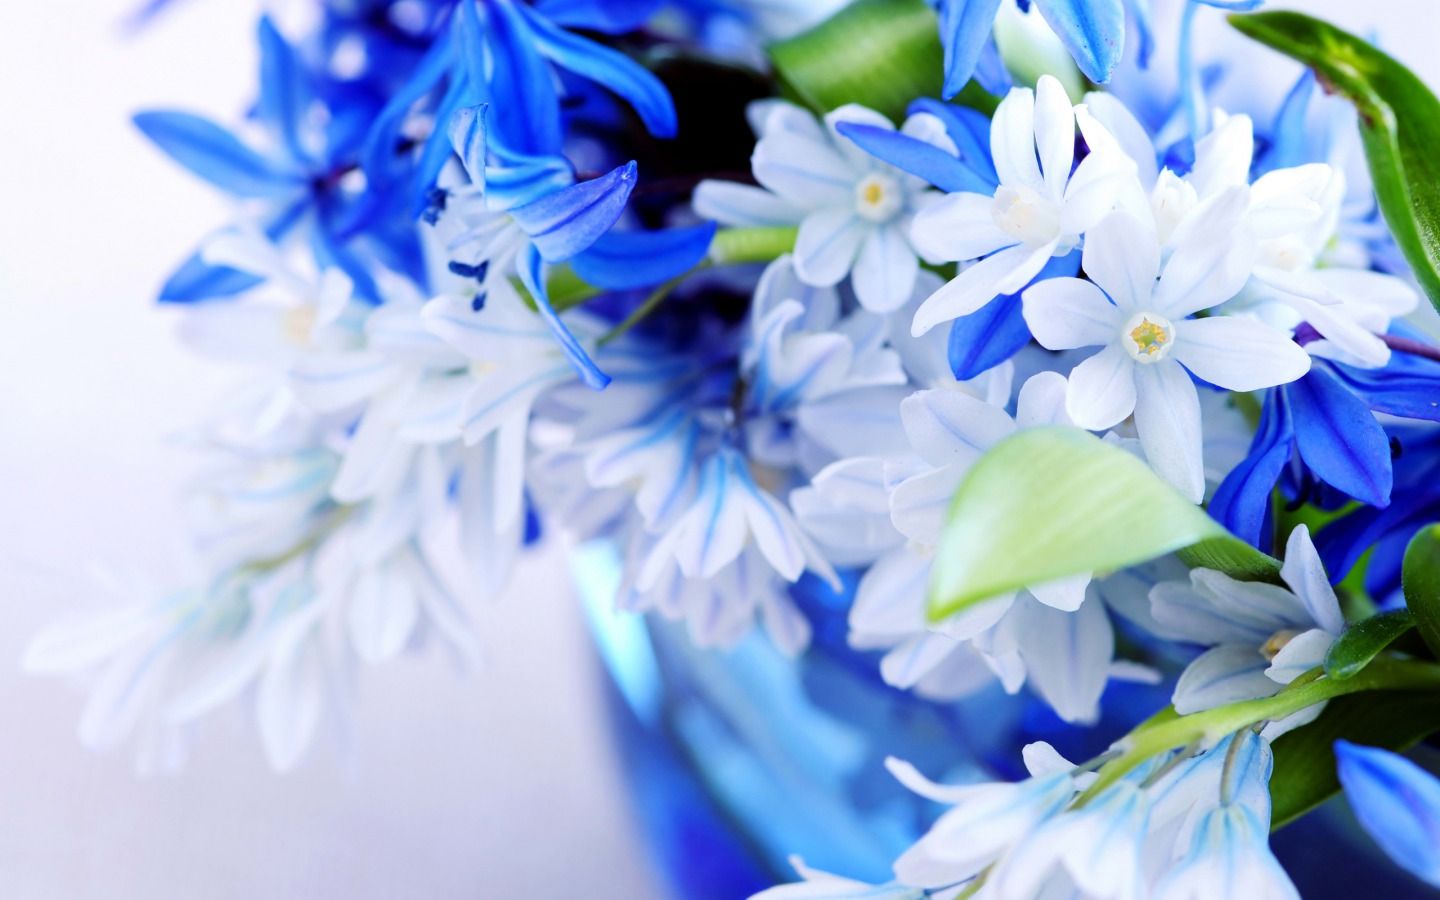 blue flowers images and wallpapers Download